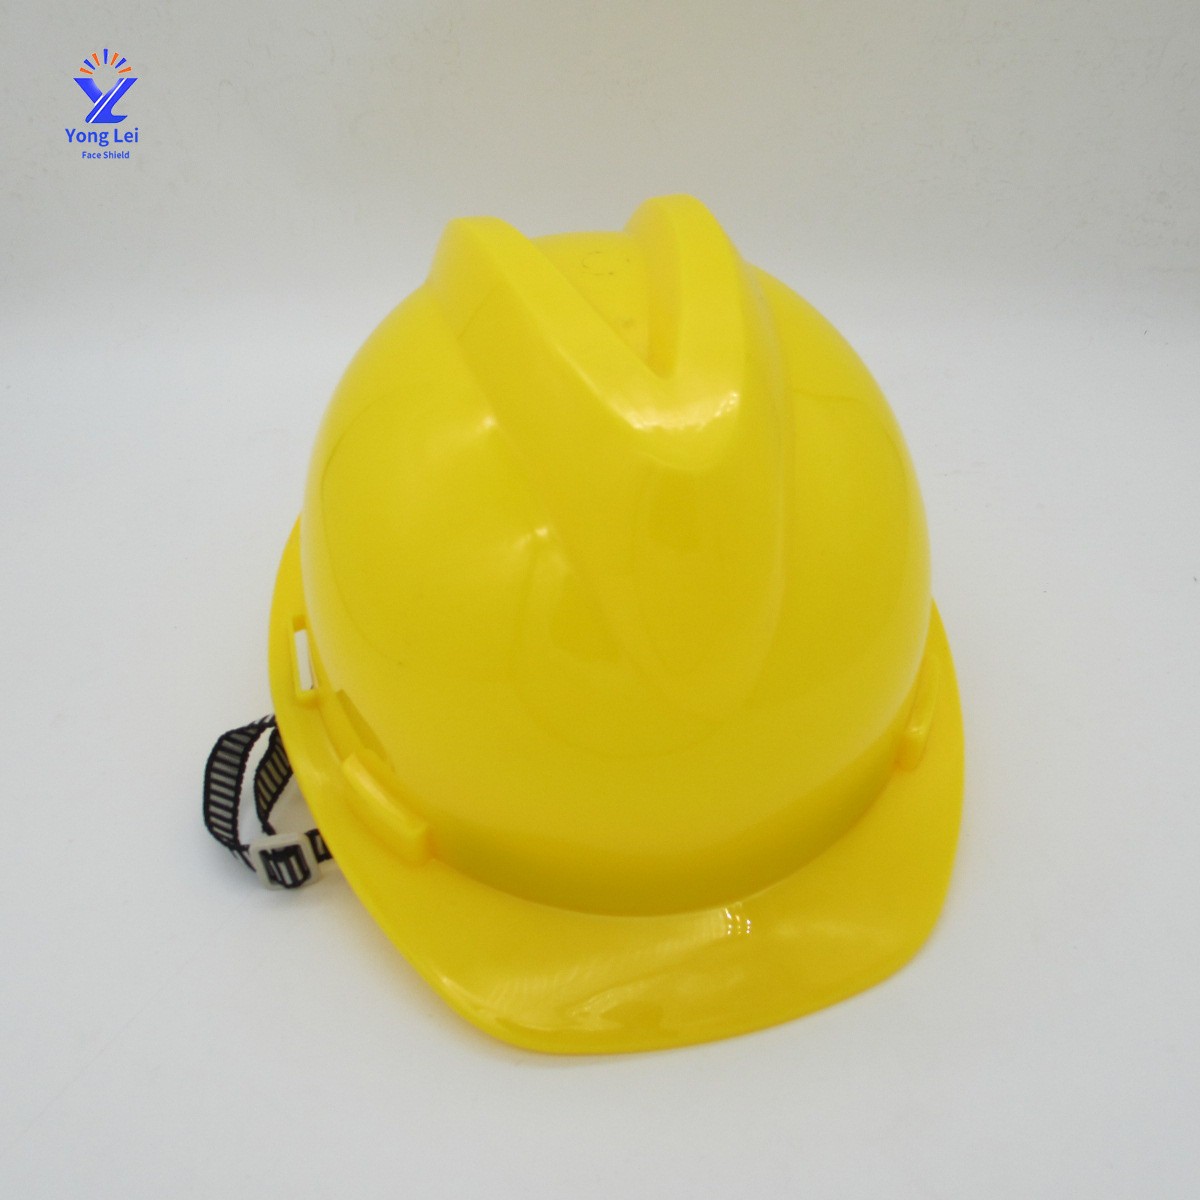 Factory Wholesale Cheap Plastic Safety Helmet Protect Head Outside Working Construction Sites